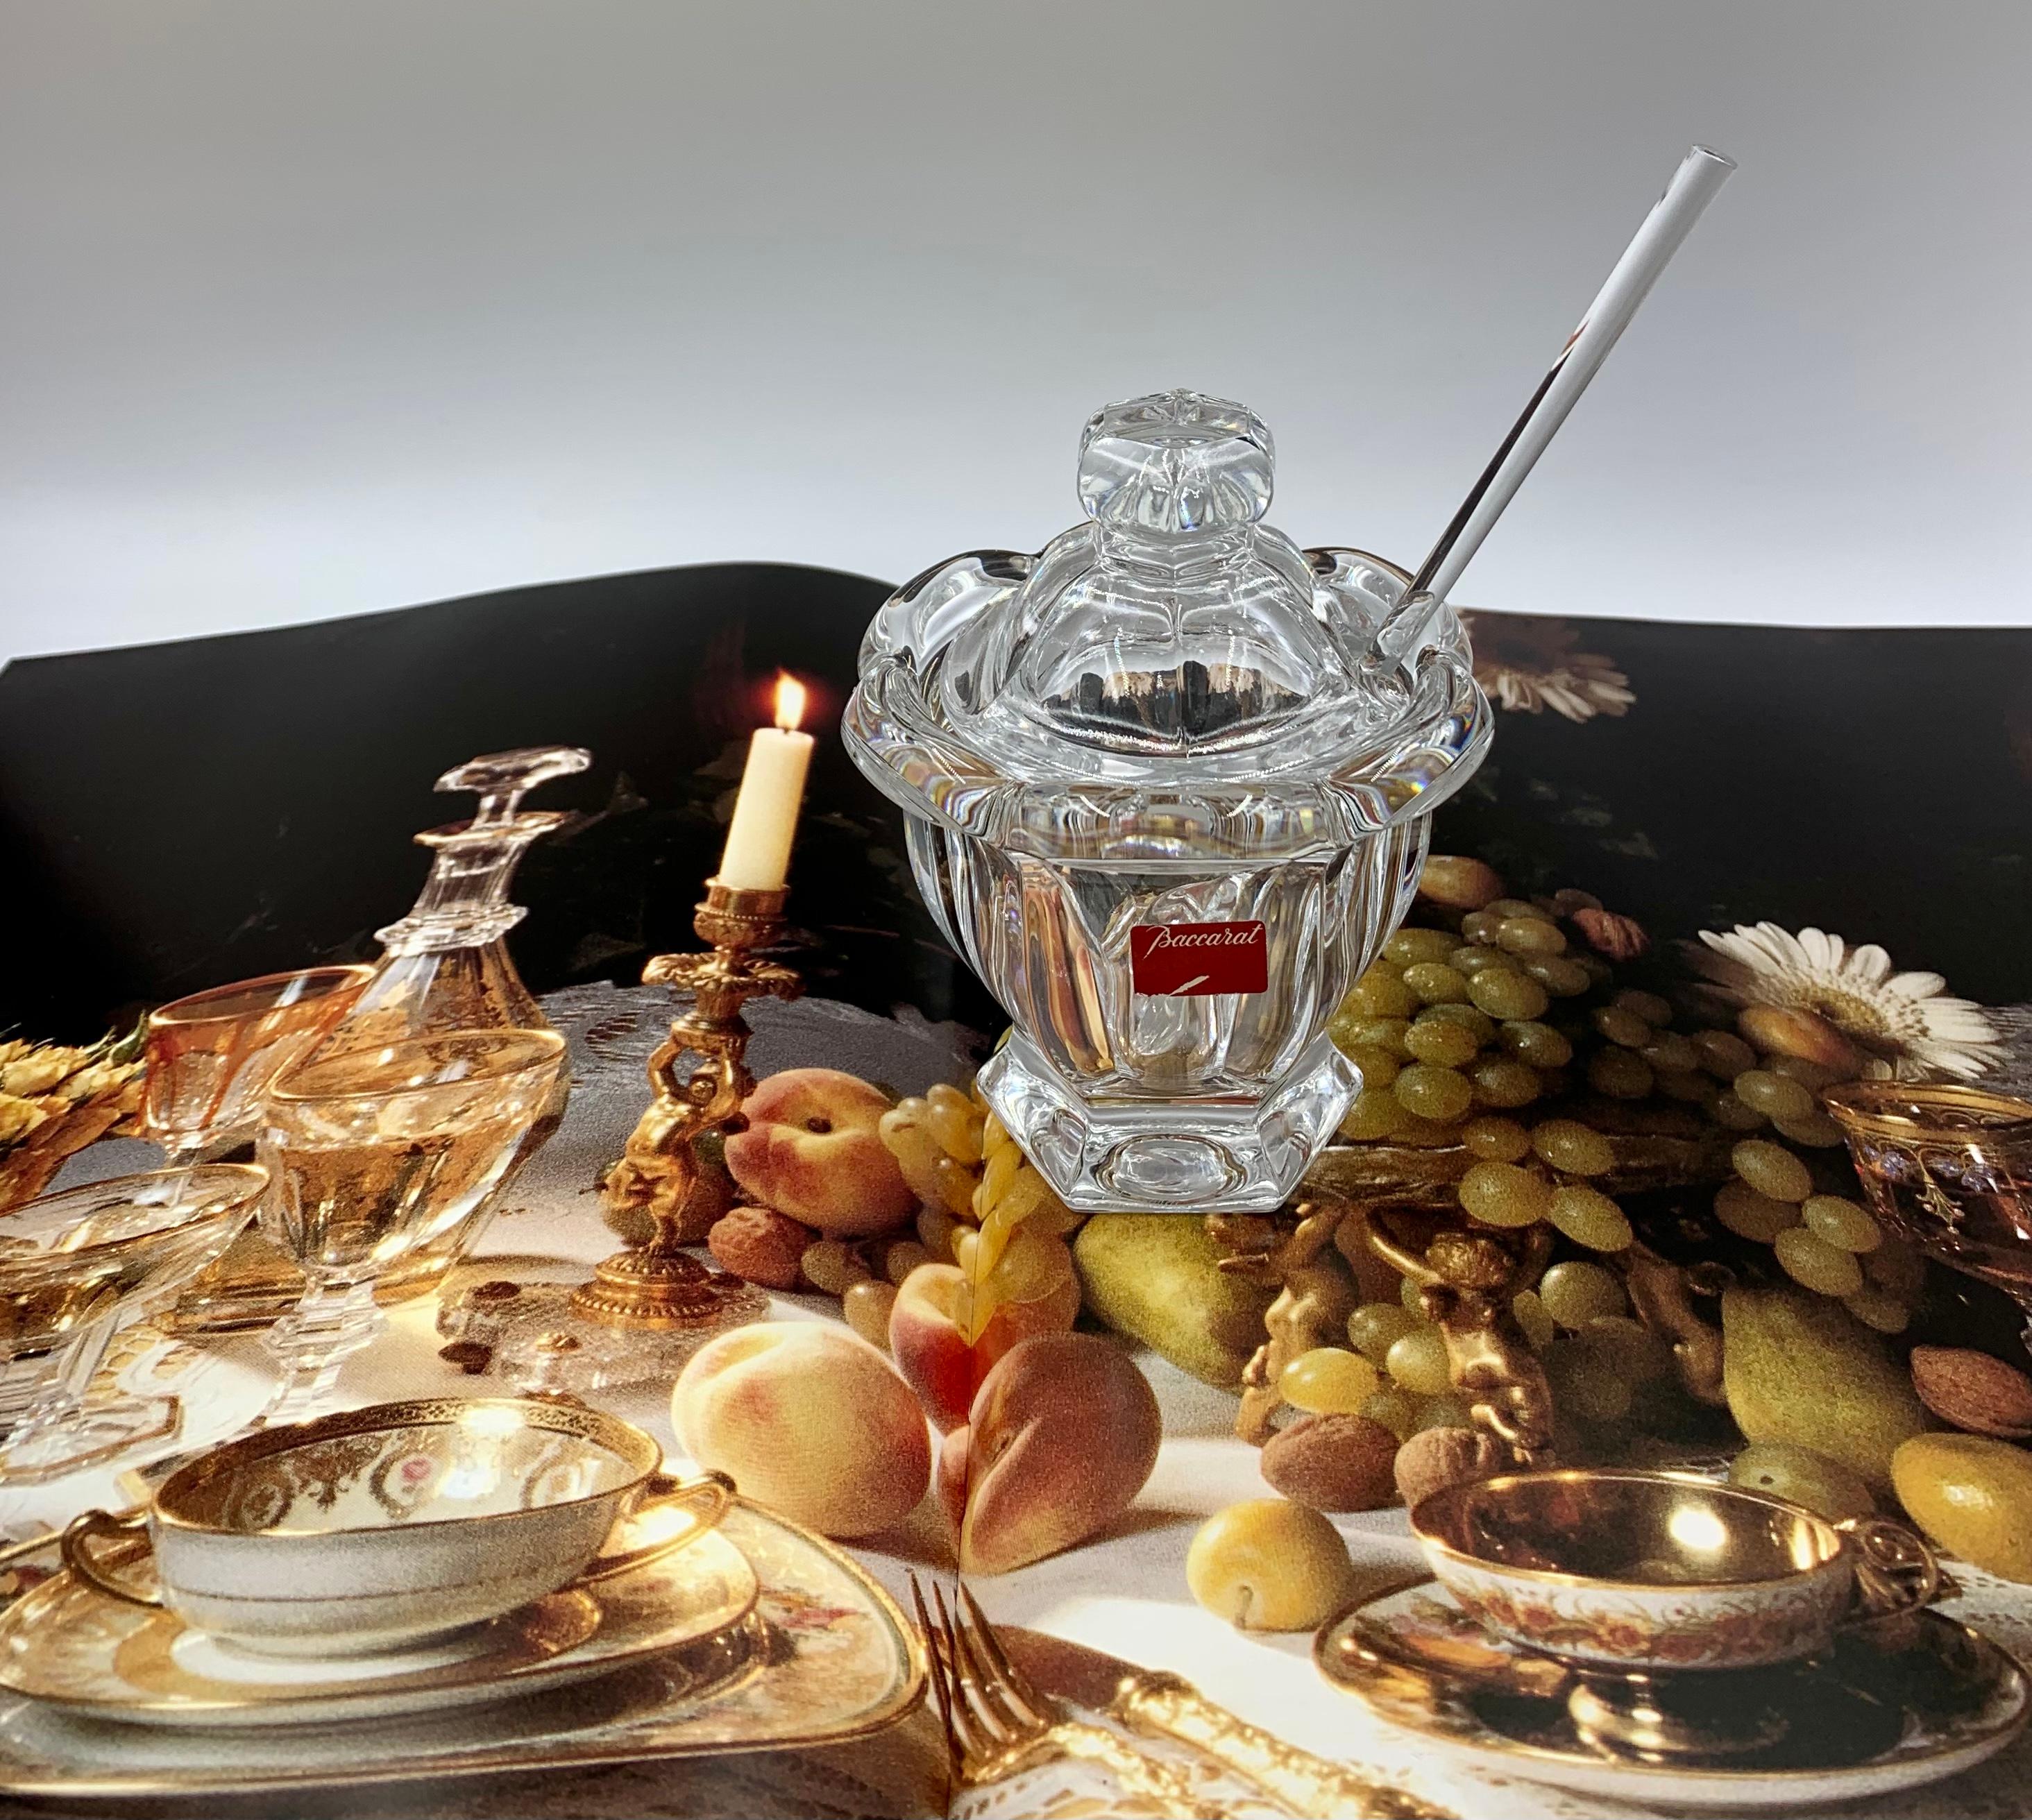 This beautiful, luxurious Baccarat Harcourt serving piece makes a perfect gift and an elegant addition to any dining table. It is an ideal vessel for caviar at an intimate dinner, wonderful for jam or honey and a myriad of other condiments which